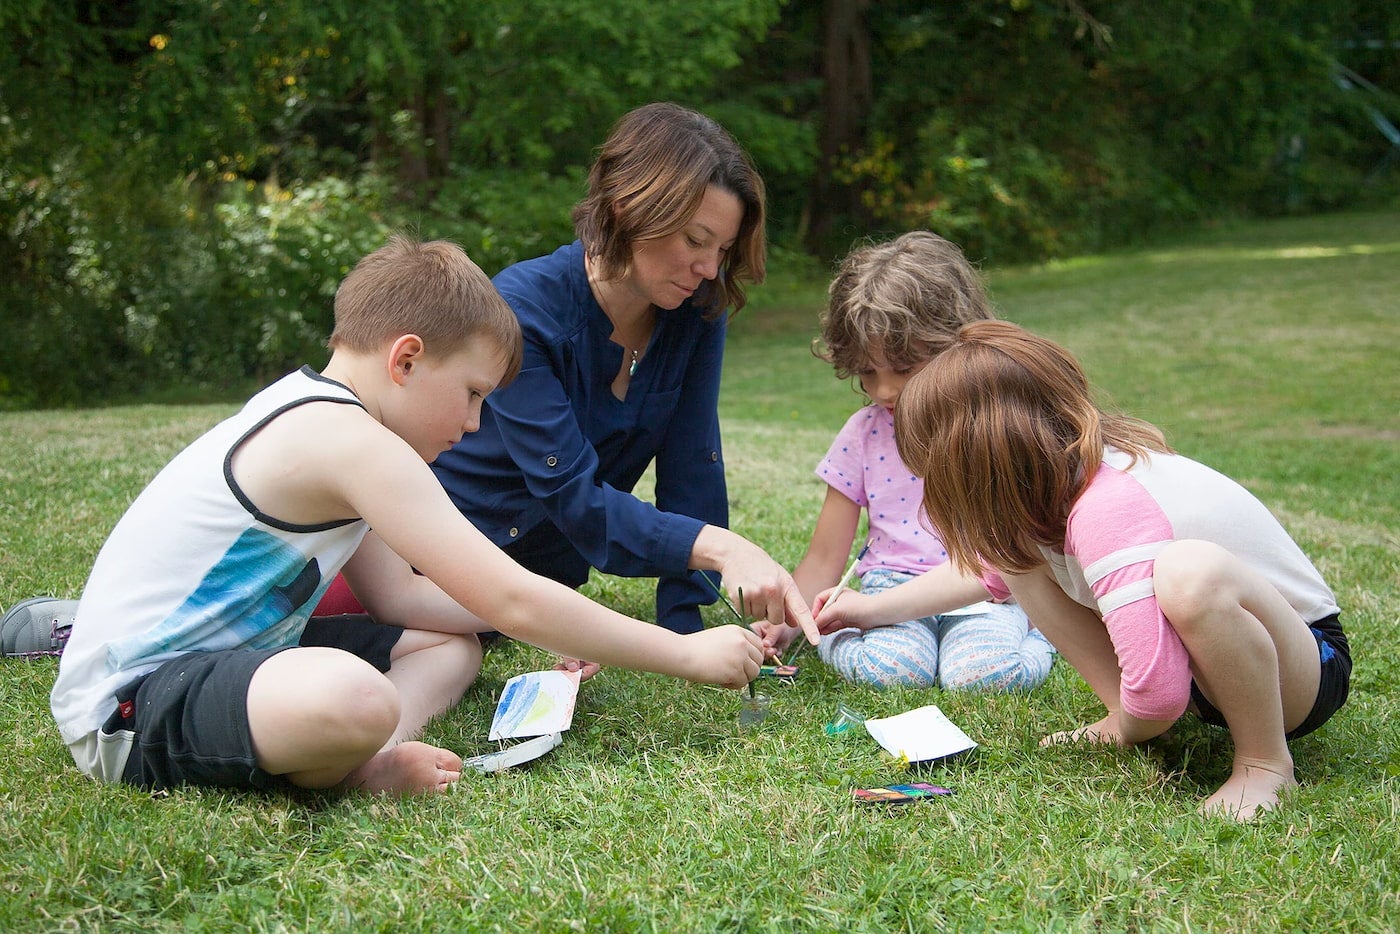 Teacher and students looking at notebooks on a grassy lawn.